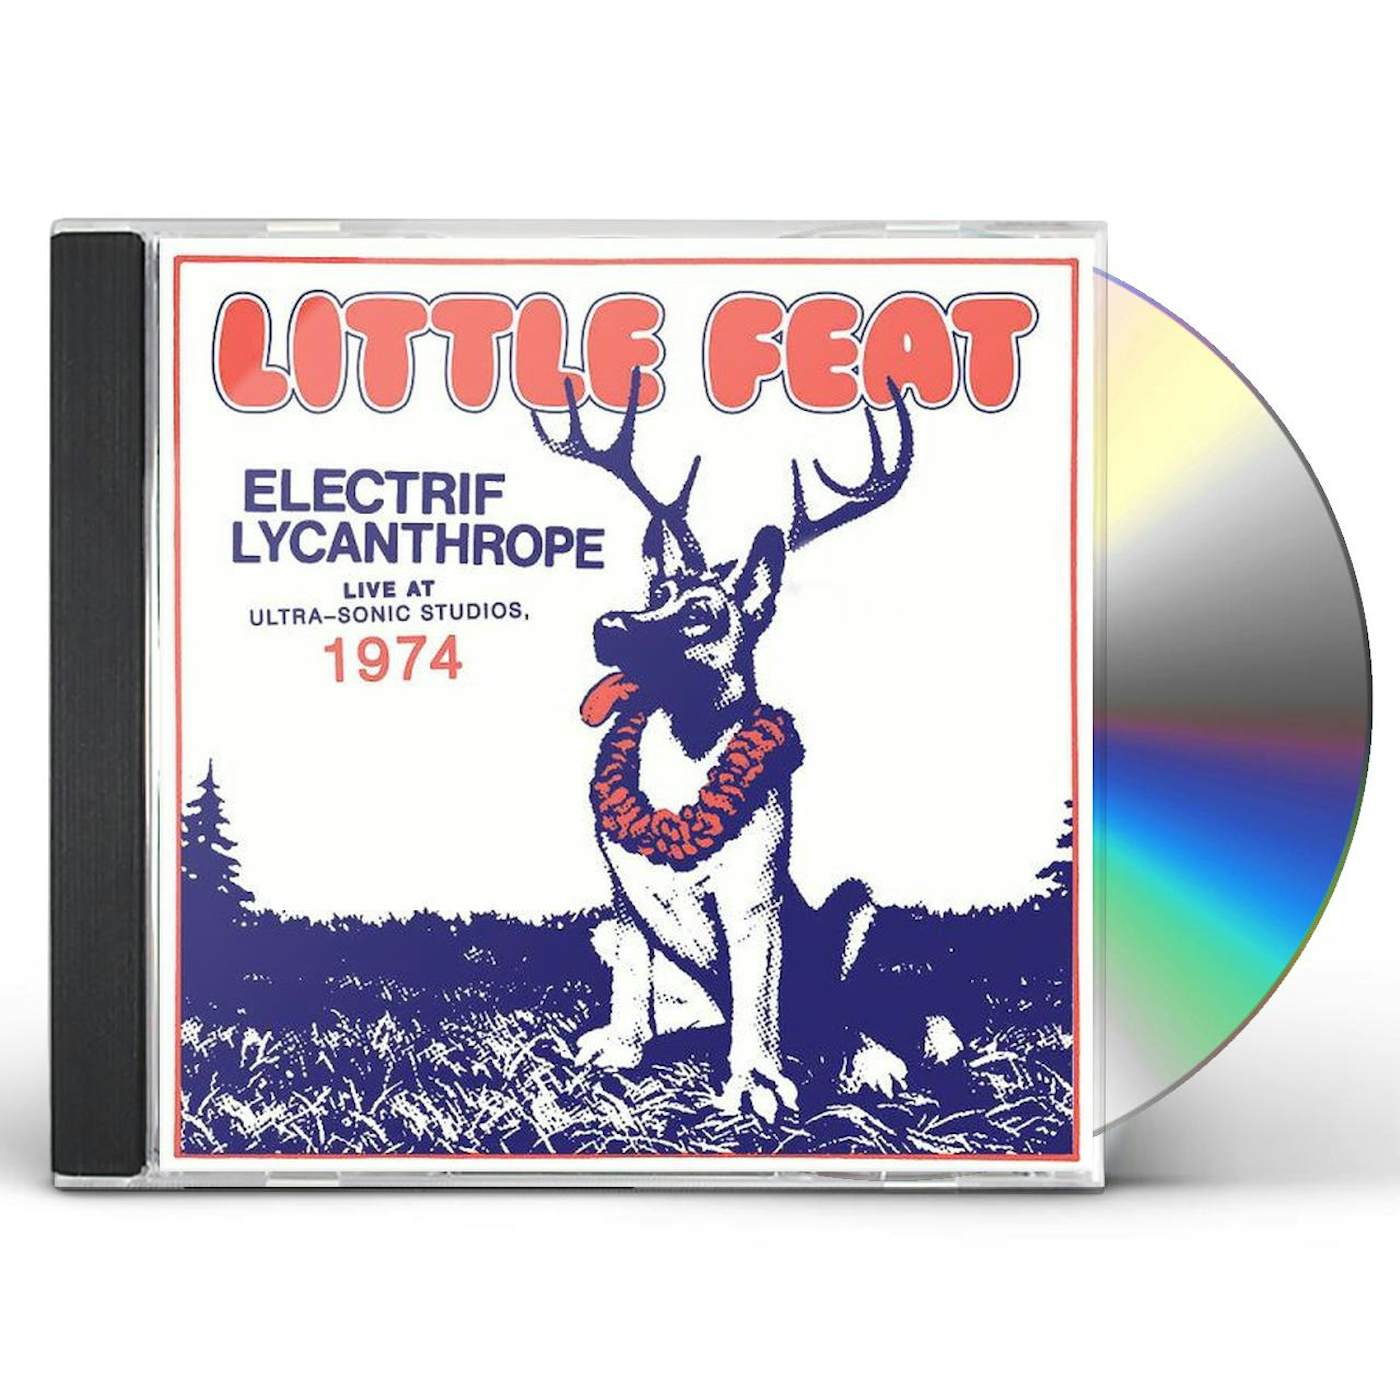 Little Feat ELECTRIF LYCANTHROPE (RSD) CD